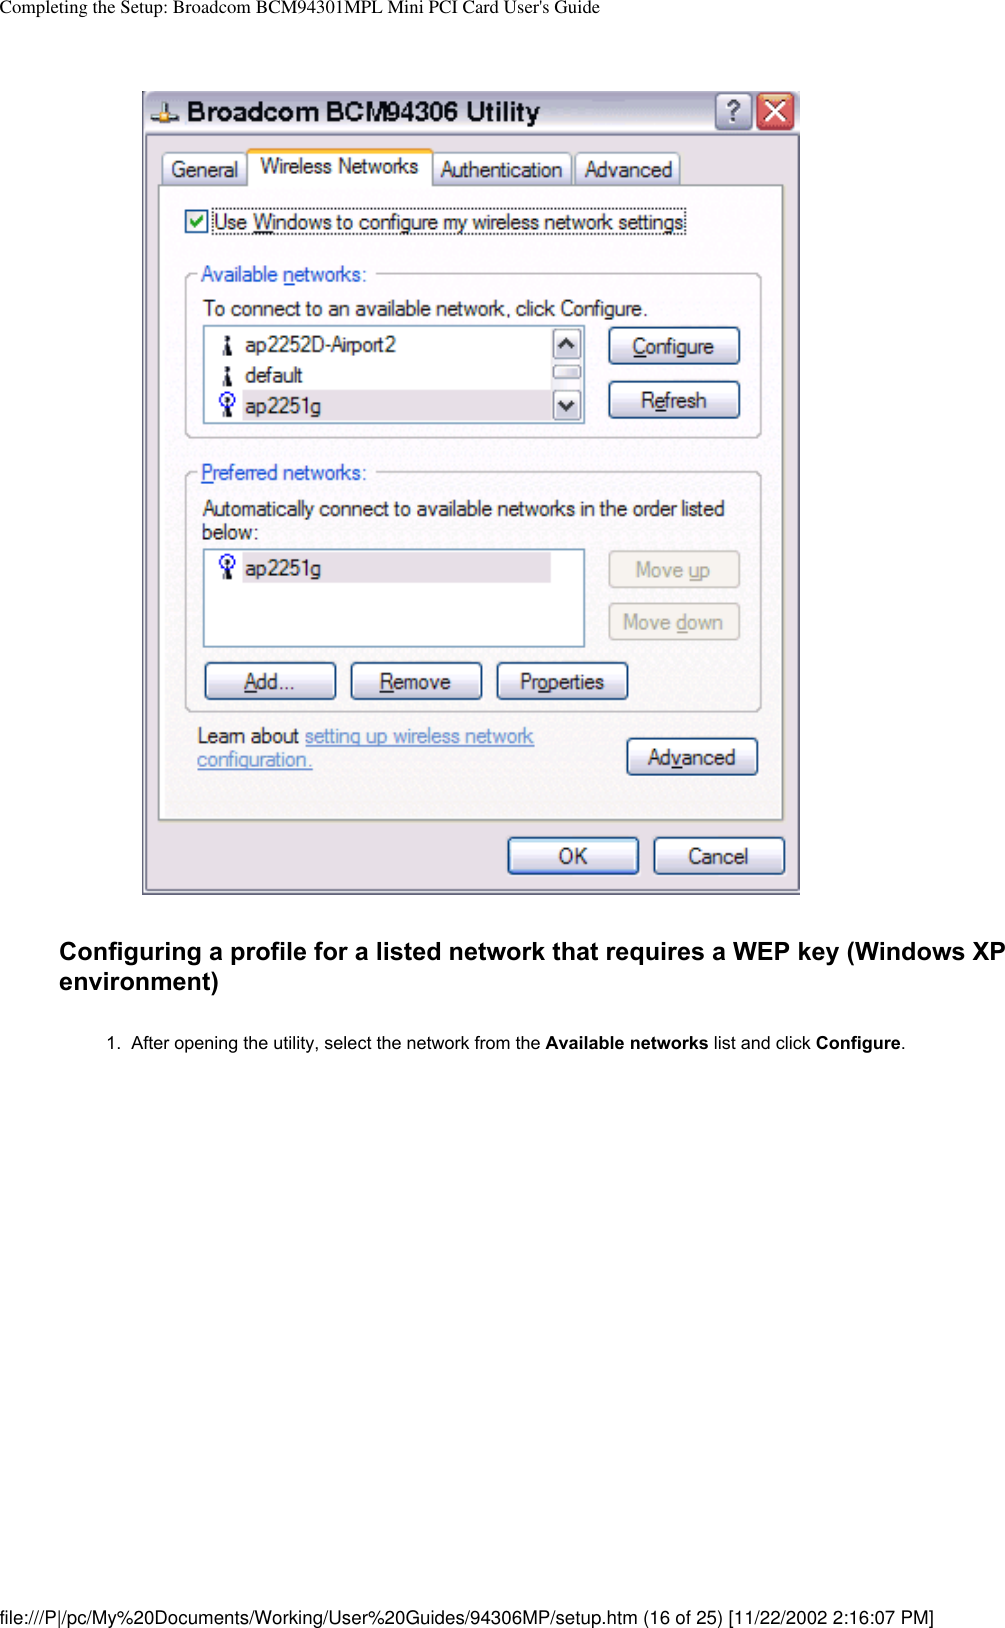 Completing the Setup: Broadcom BCM94301MPL Mini PCI Card User&apos;s GuideConfiguring a profile for a listed network that requires a WEP key (Windows XP environment)1.  After opening the utility, select the network from the Available networks list and click Configure. file:///P|/pc/My%20Documents/Working/User%20Guides/94306MP/setup.htm (16 of 25) [11/22/2002 2:16:07 PM]